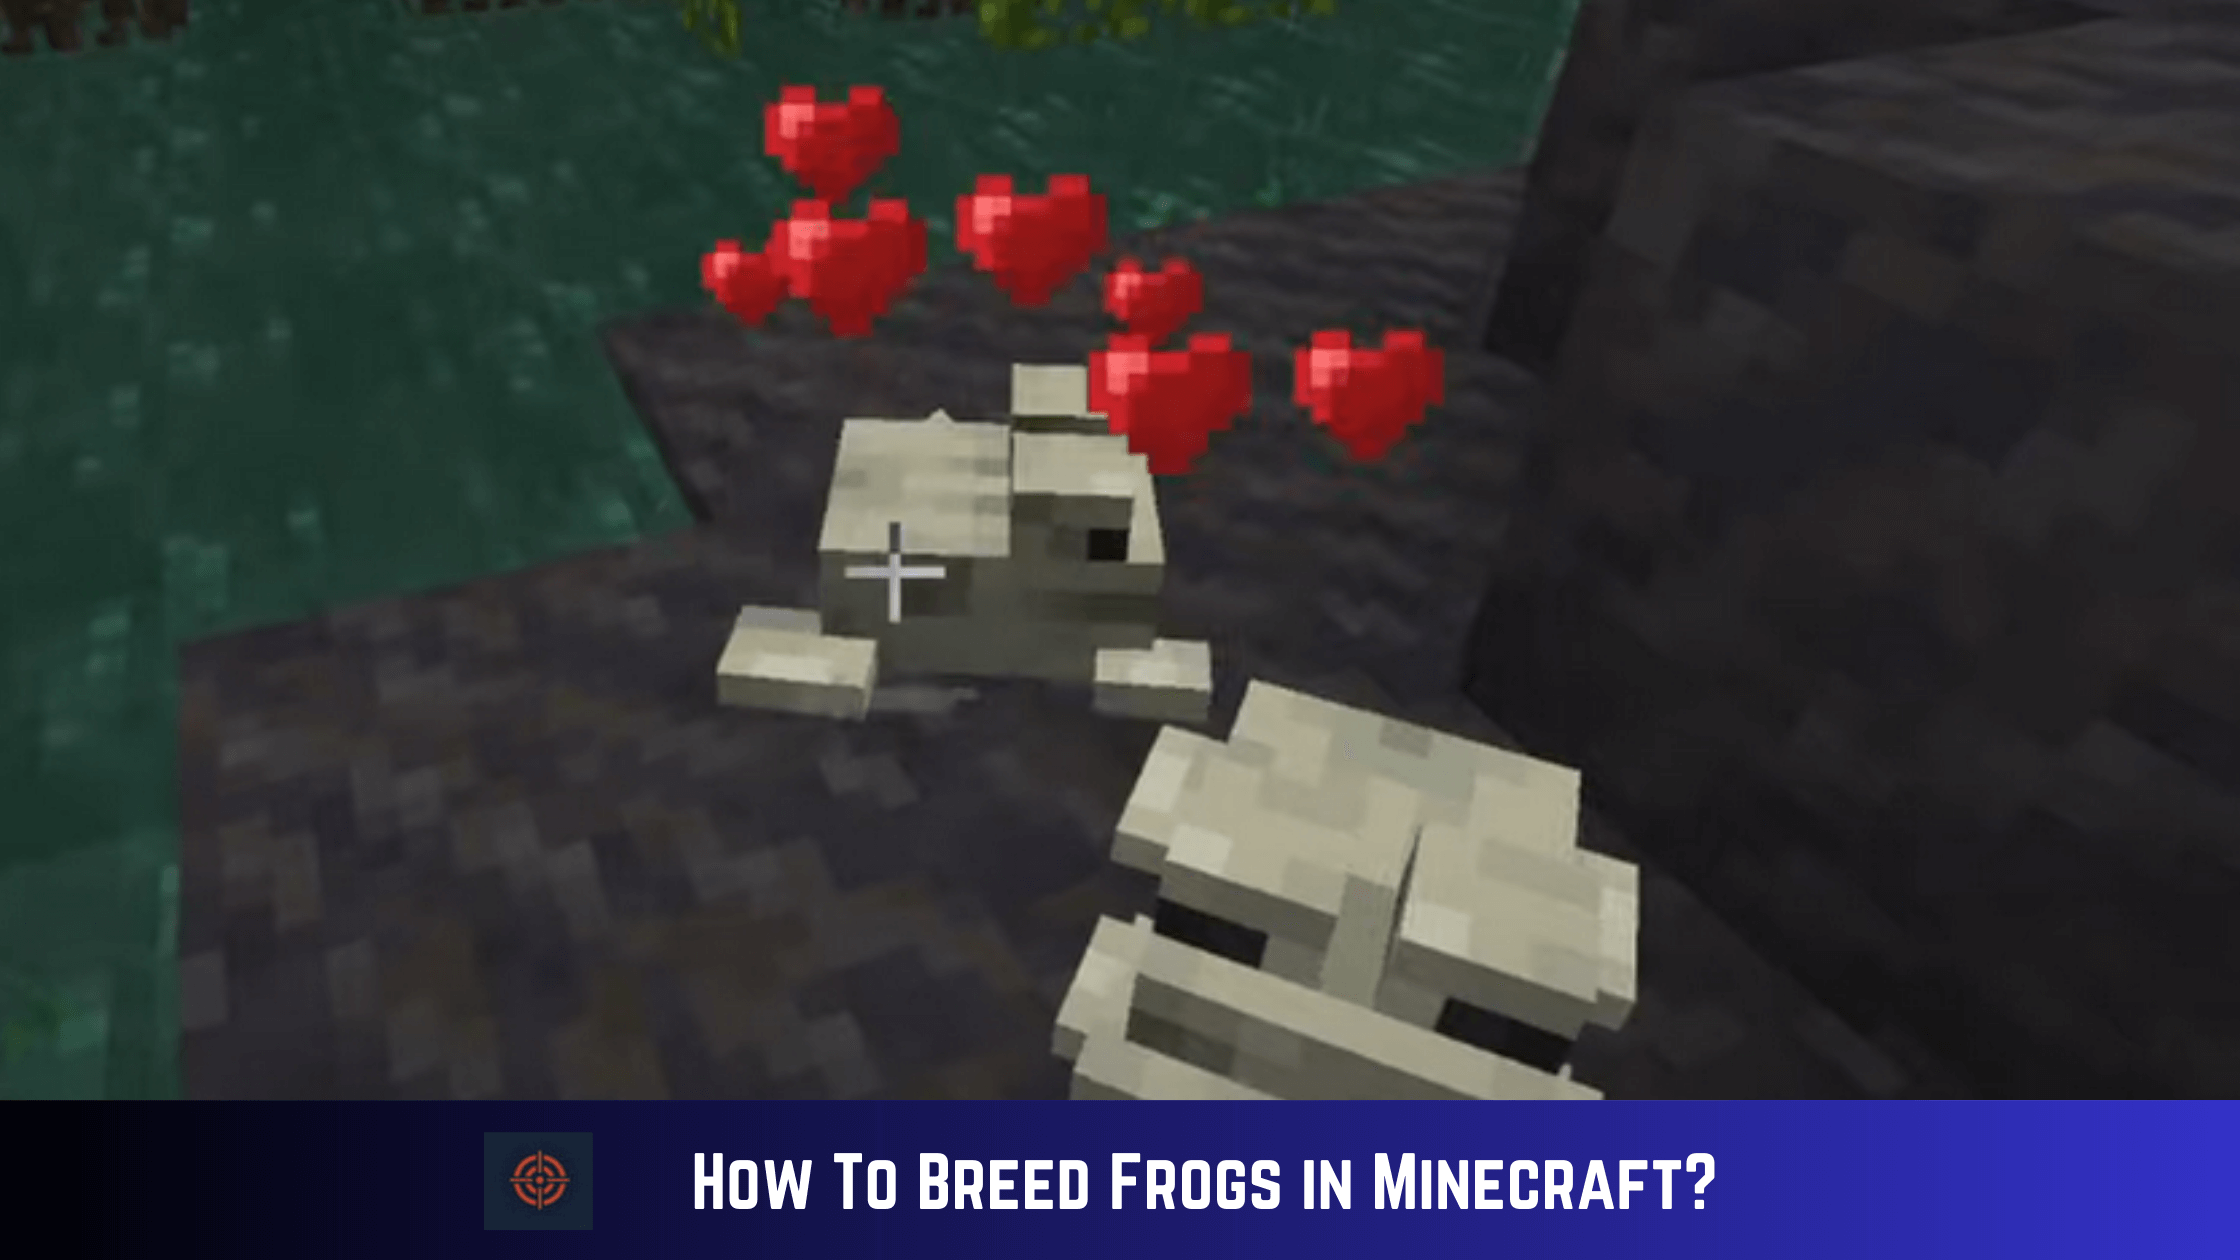 How To Breed Frogs in Minecraft